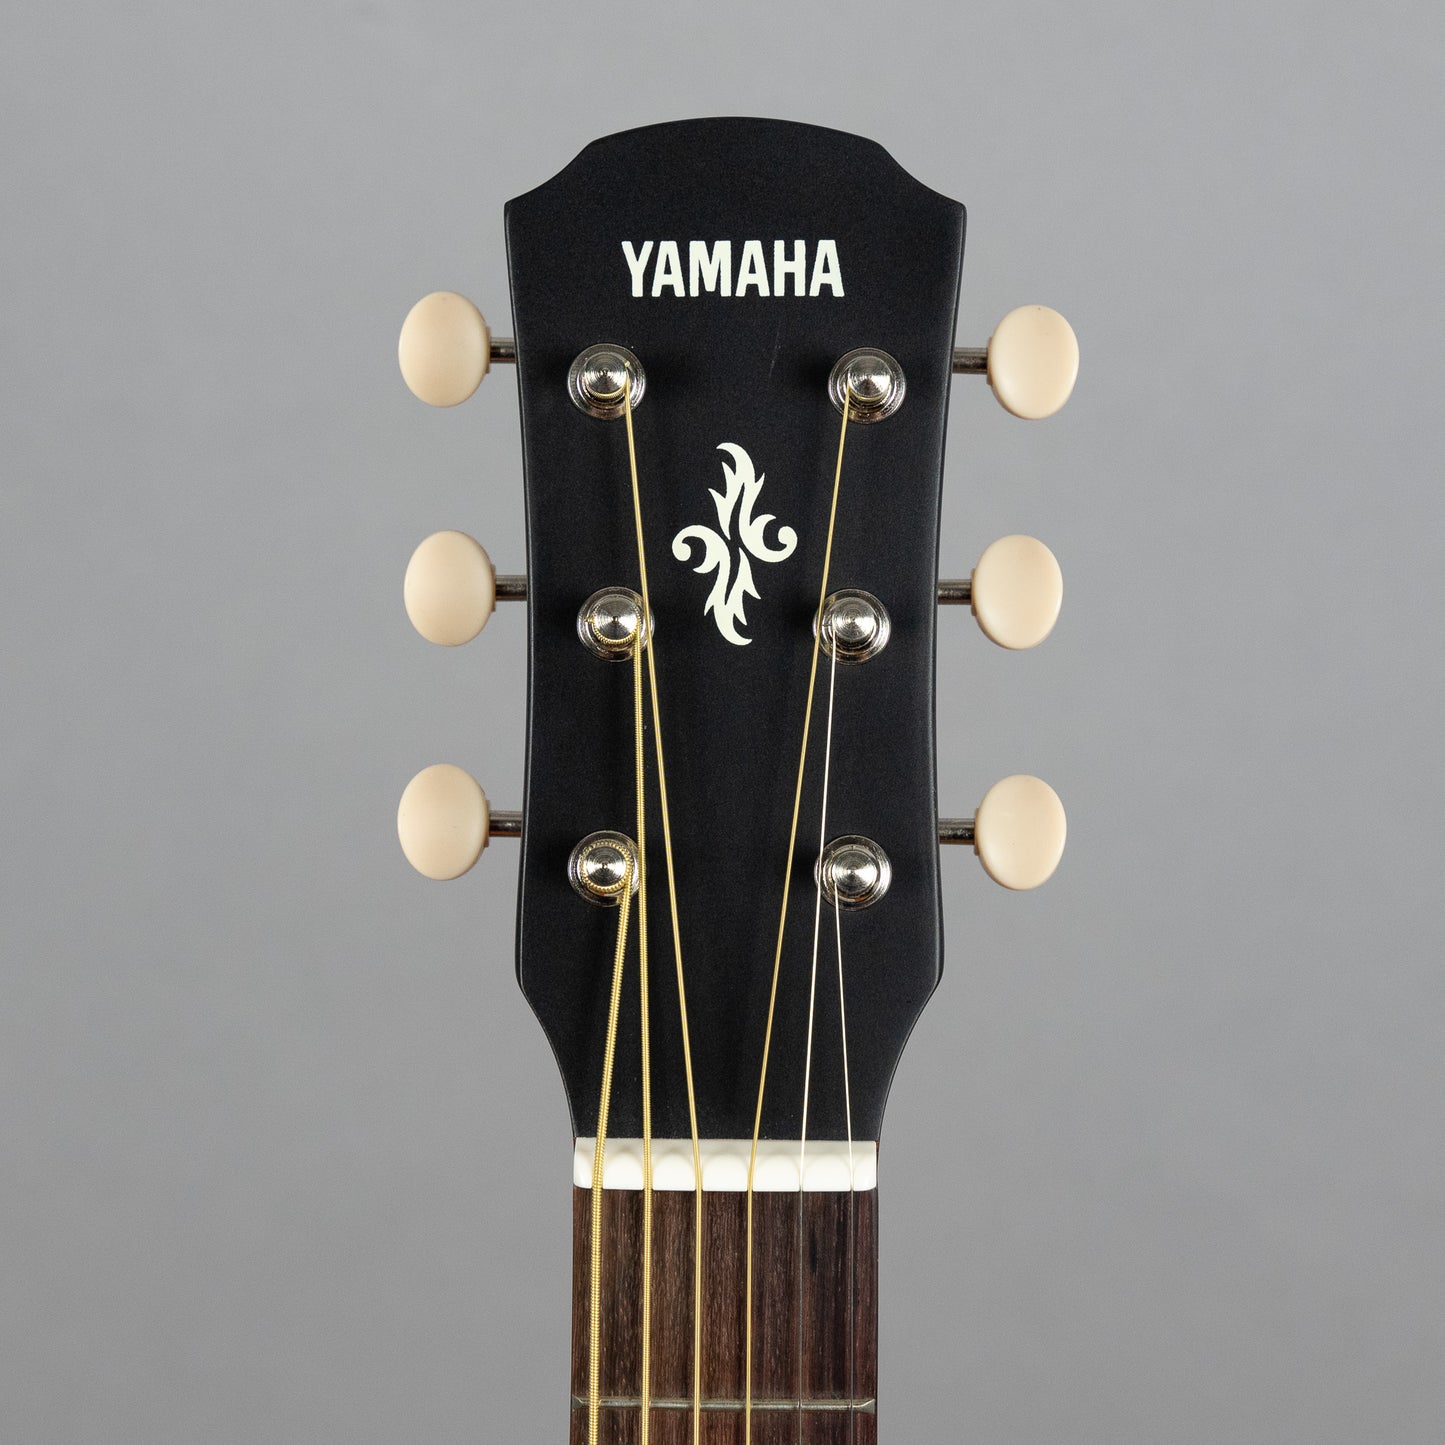 Yamaha APXT2 3/4-Size Acoustic/Electric Guitar in Natural